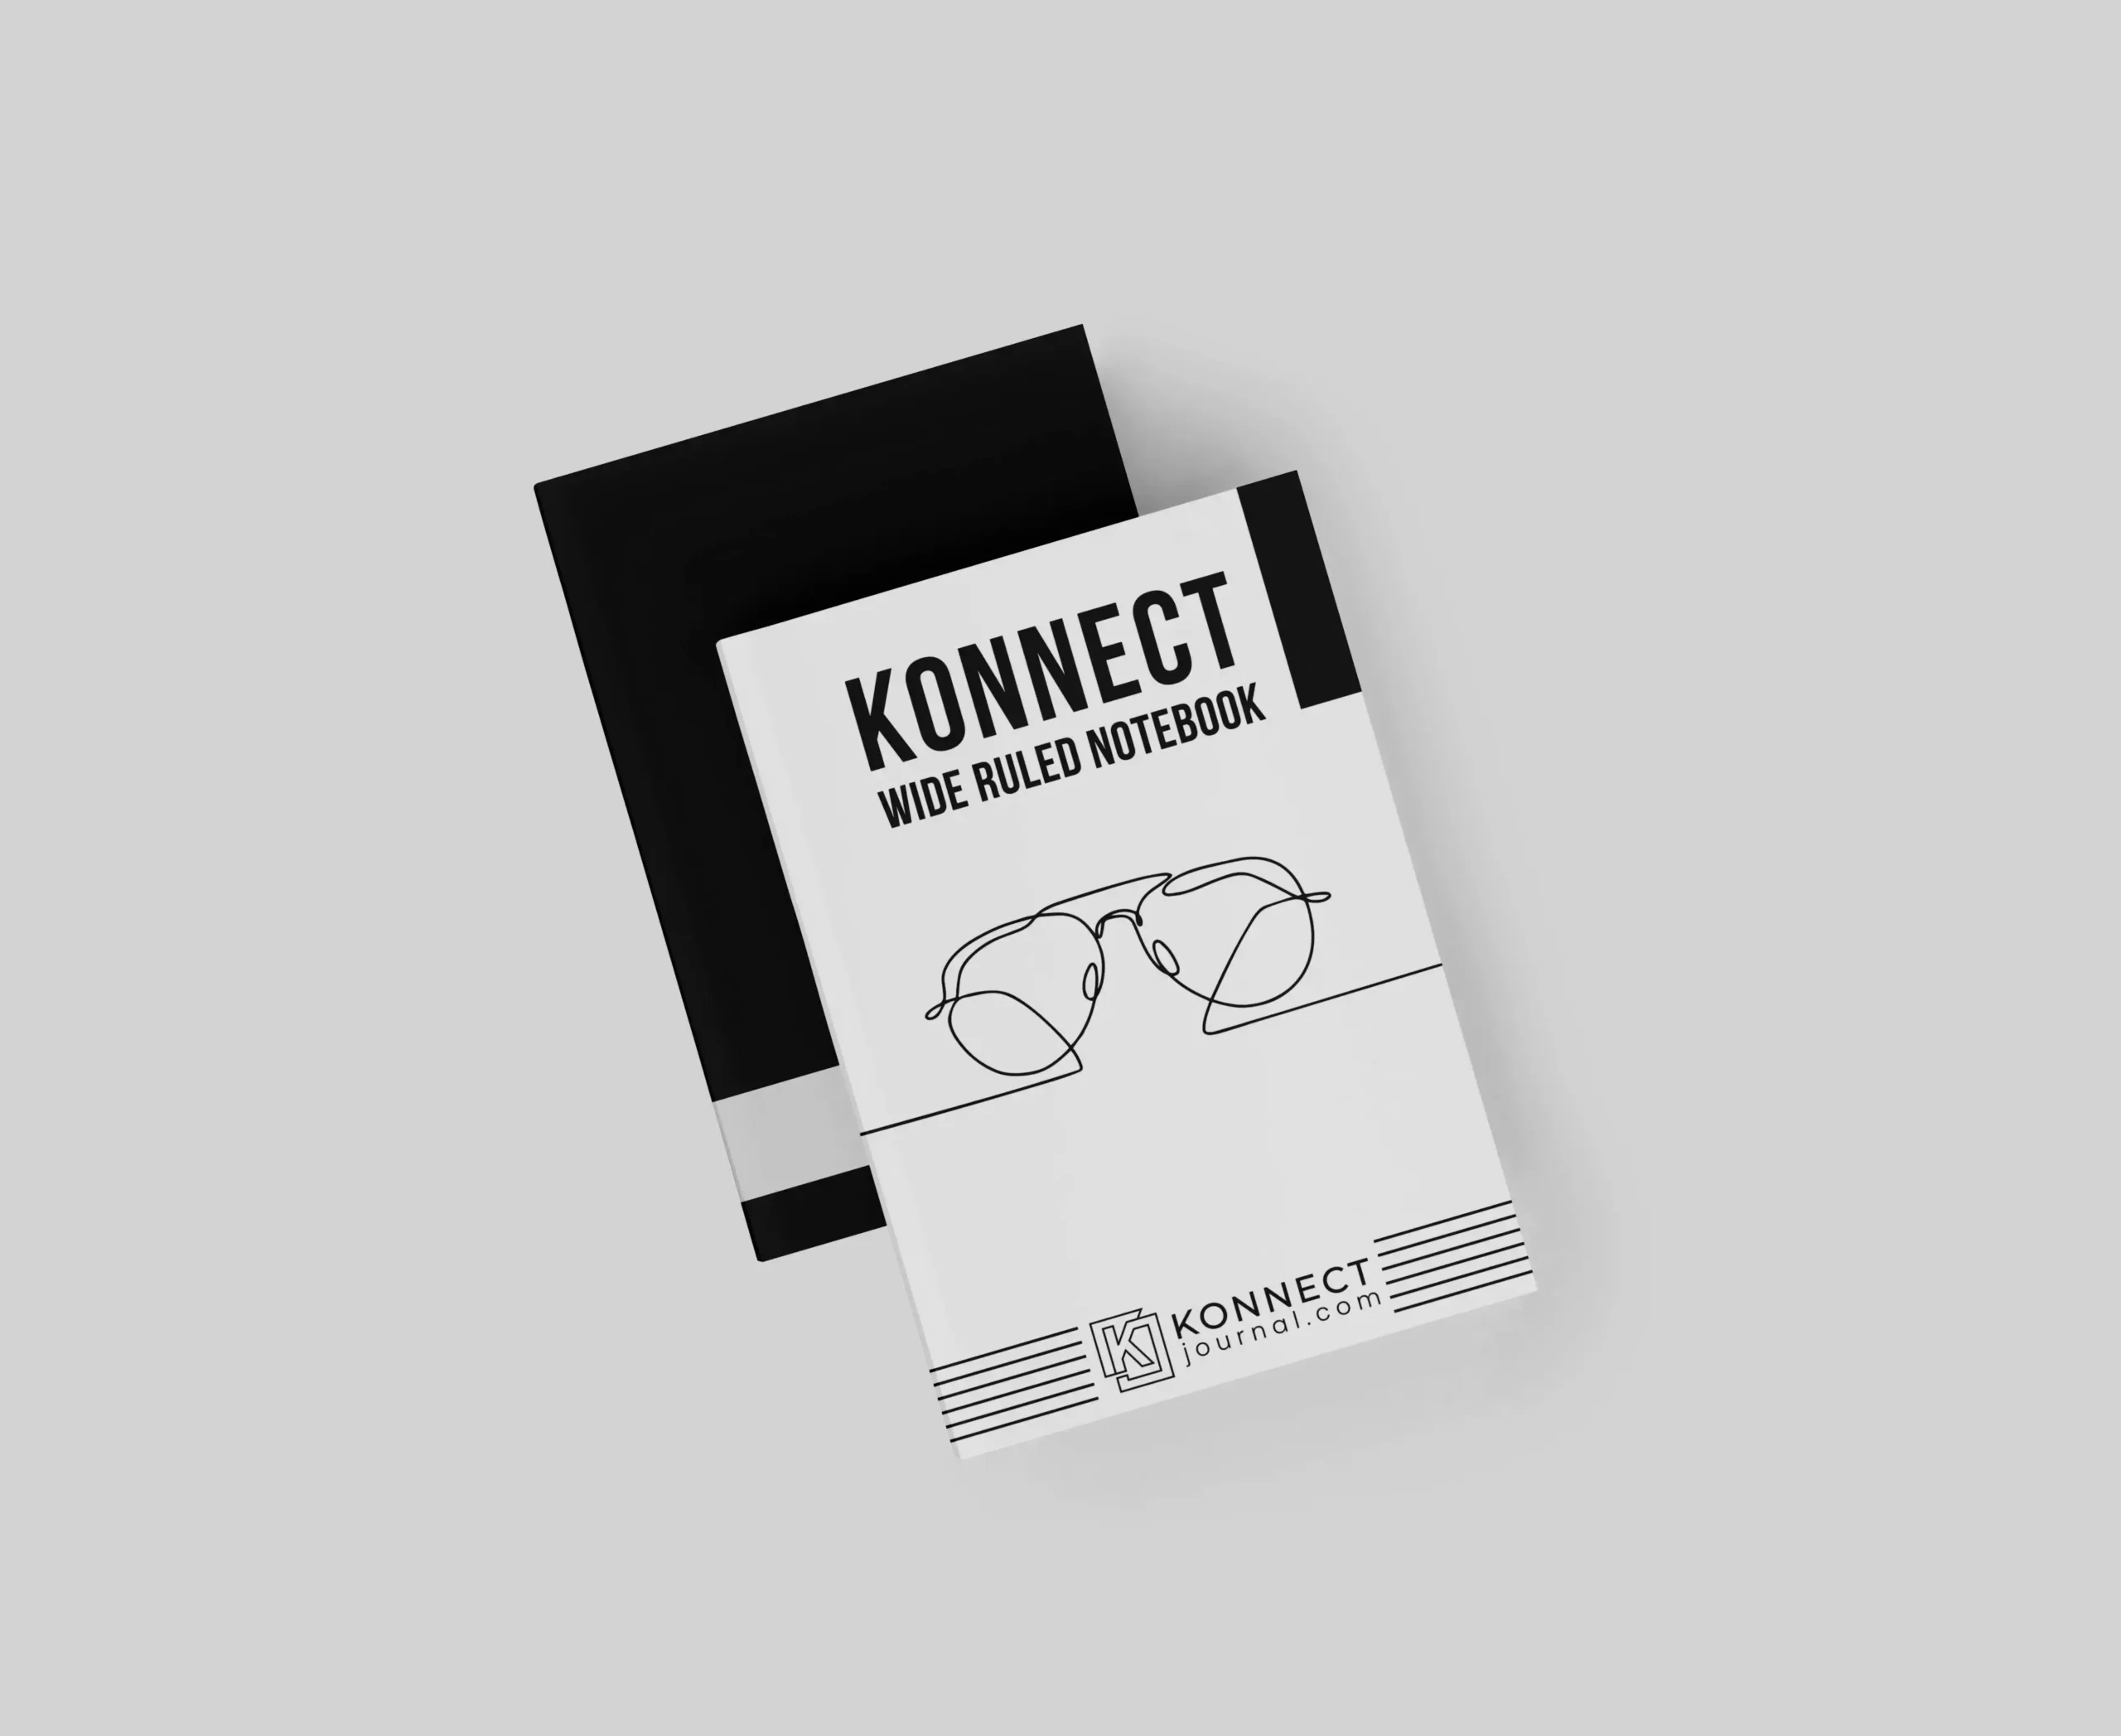 Konnect Wide Rulled Notebook